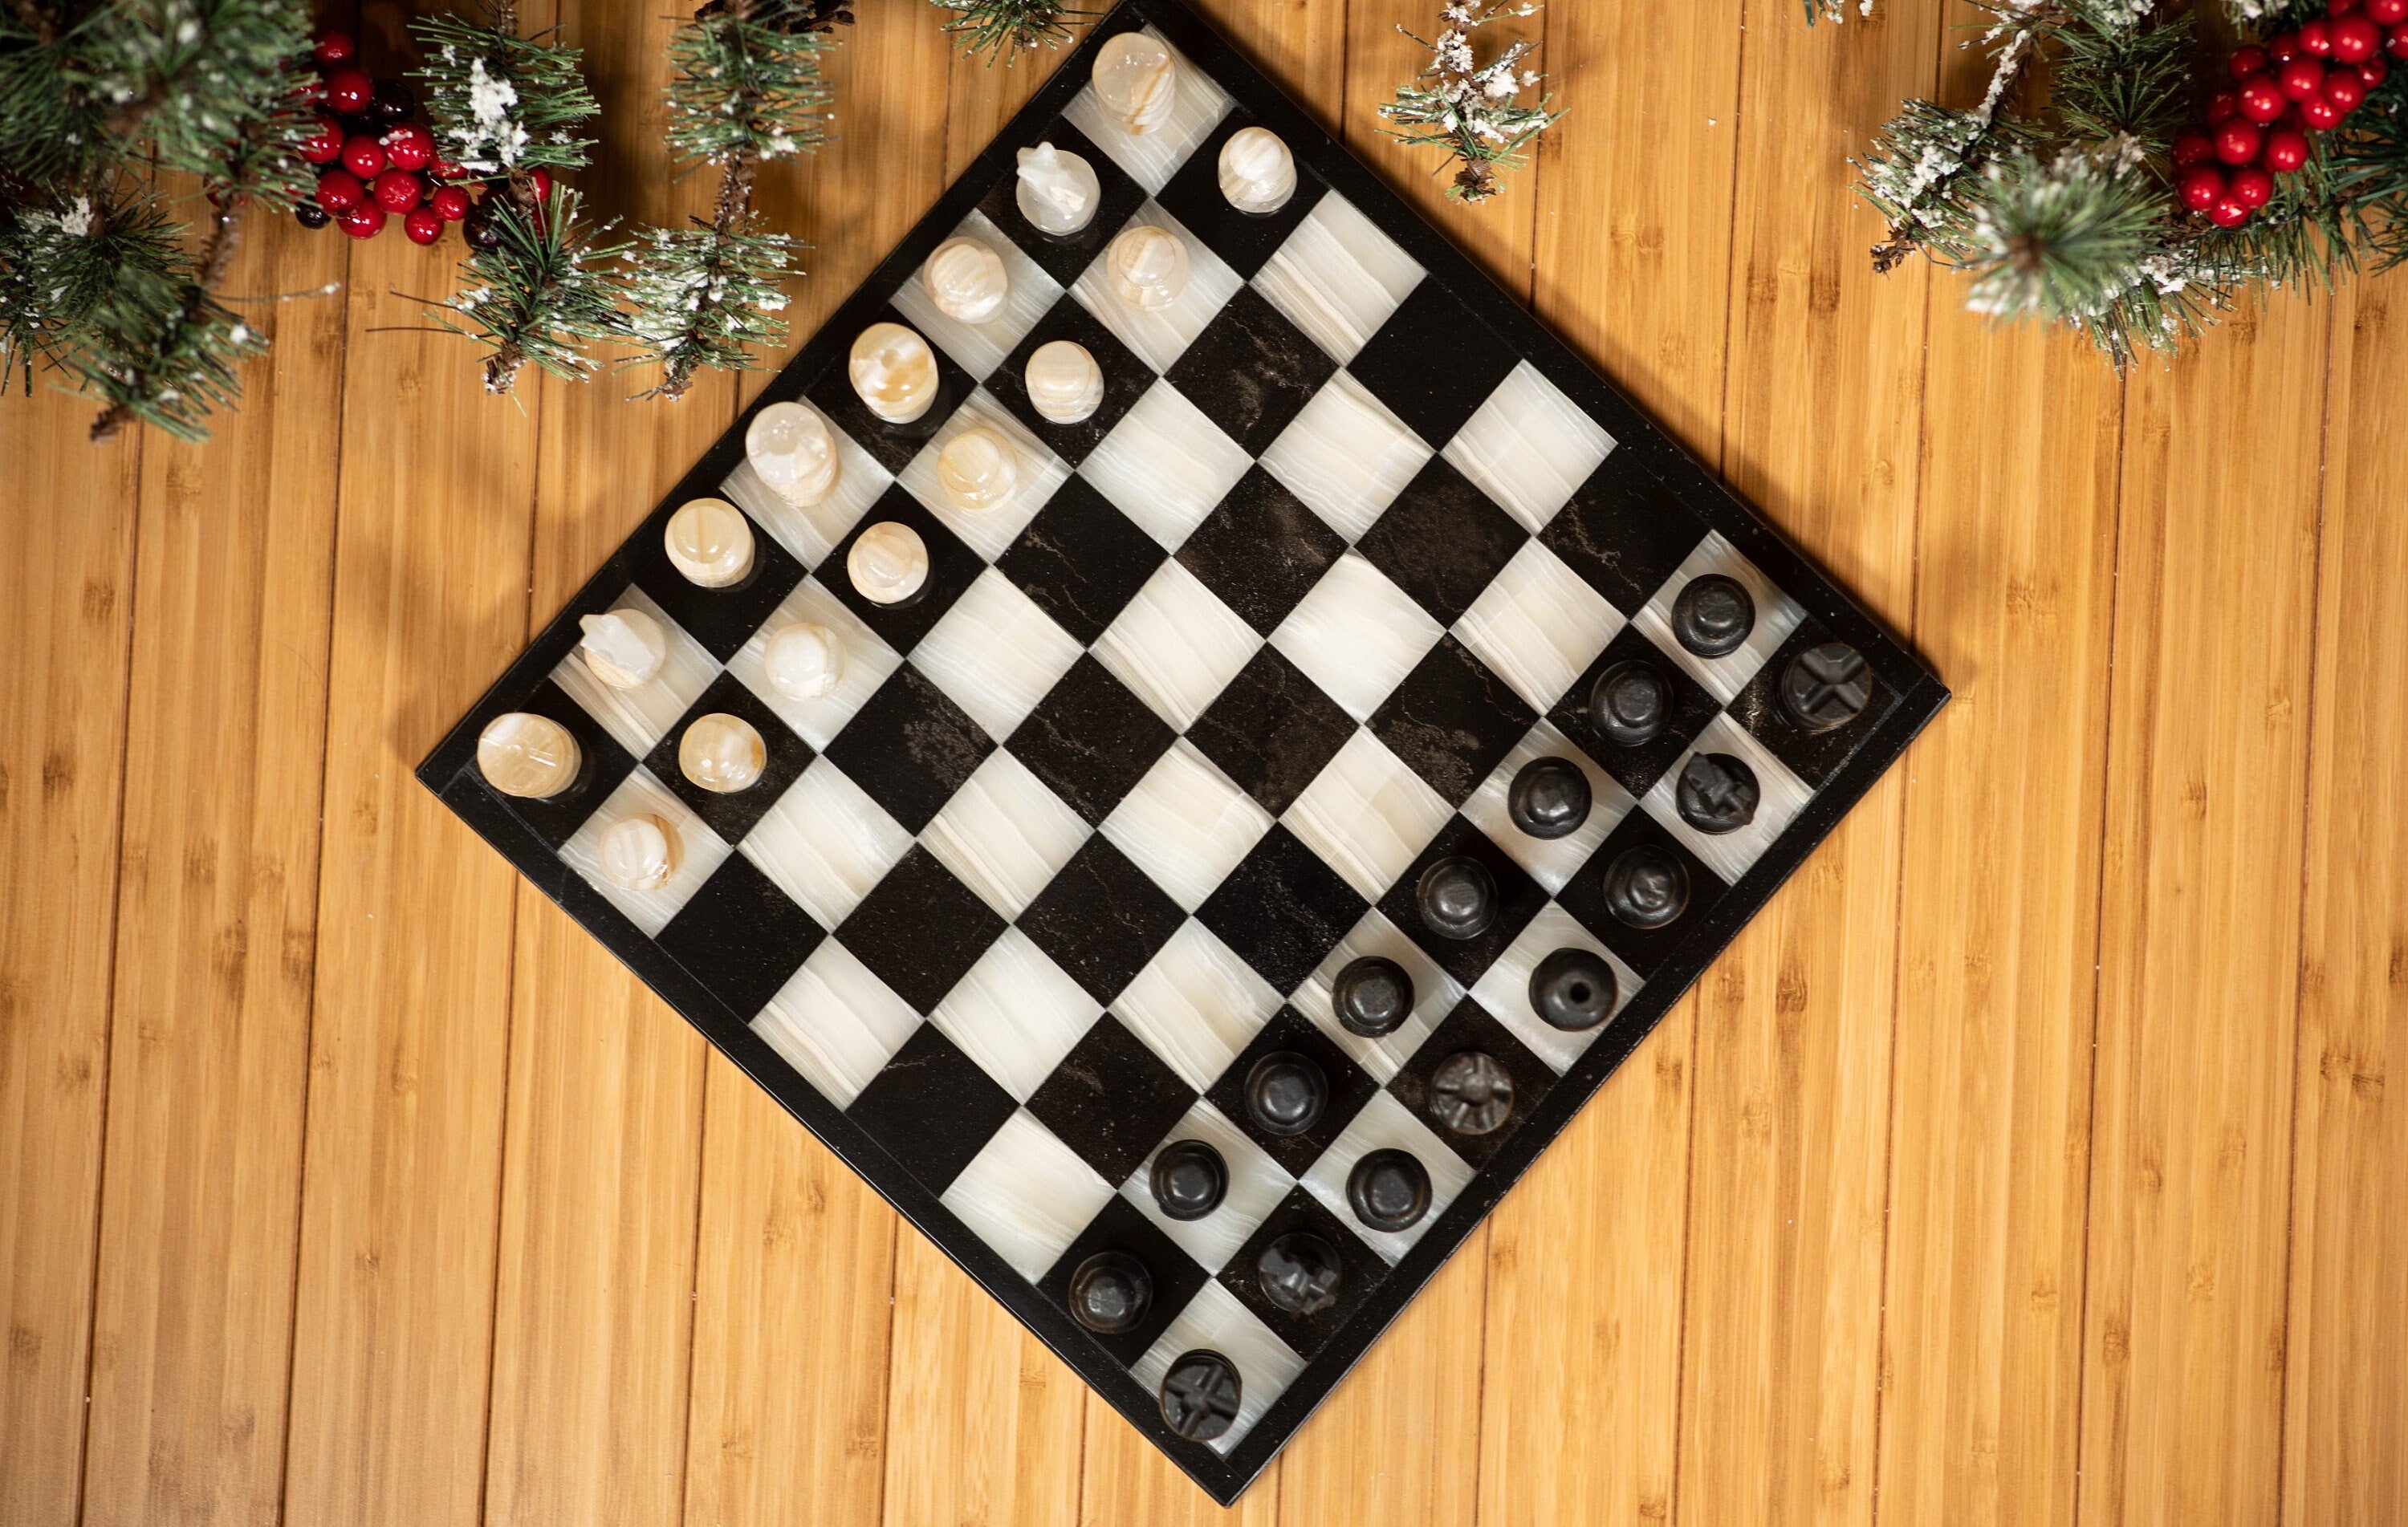 Handmade Marble & Onyx Chess Set - 12 Inch Game Board - Classic Strategy Game - Perfect for Chess Lovers and Collectors